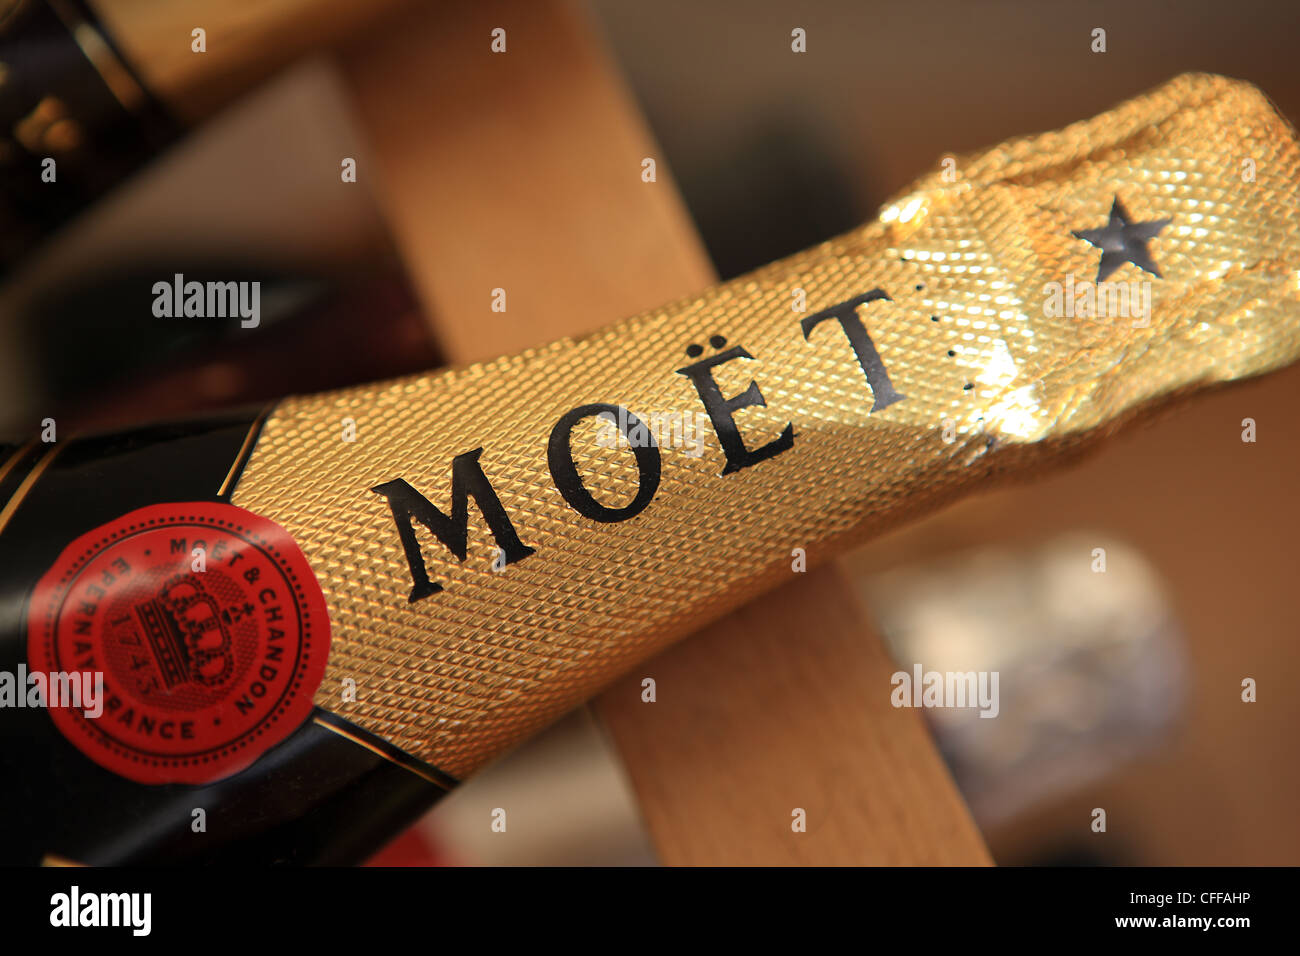 A bottle of Moet Champagne in a wine rack Stock Photo